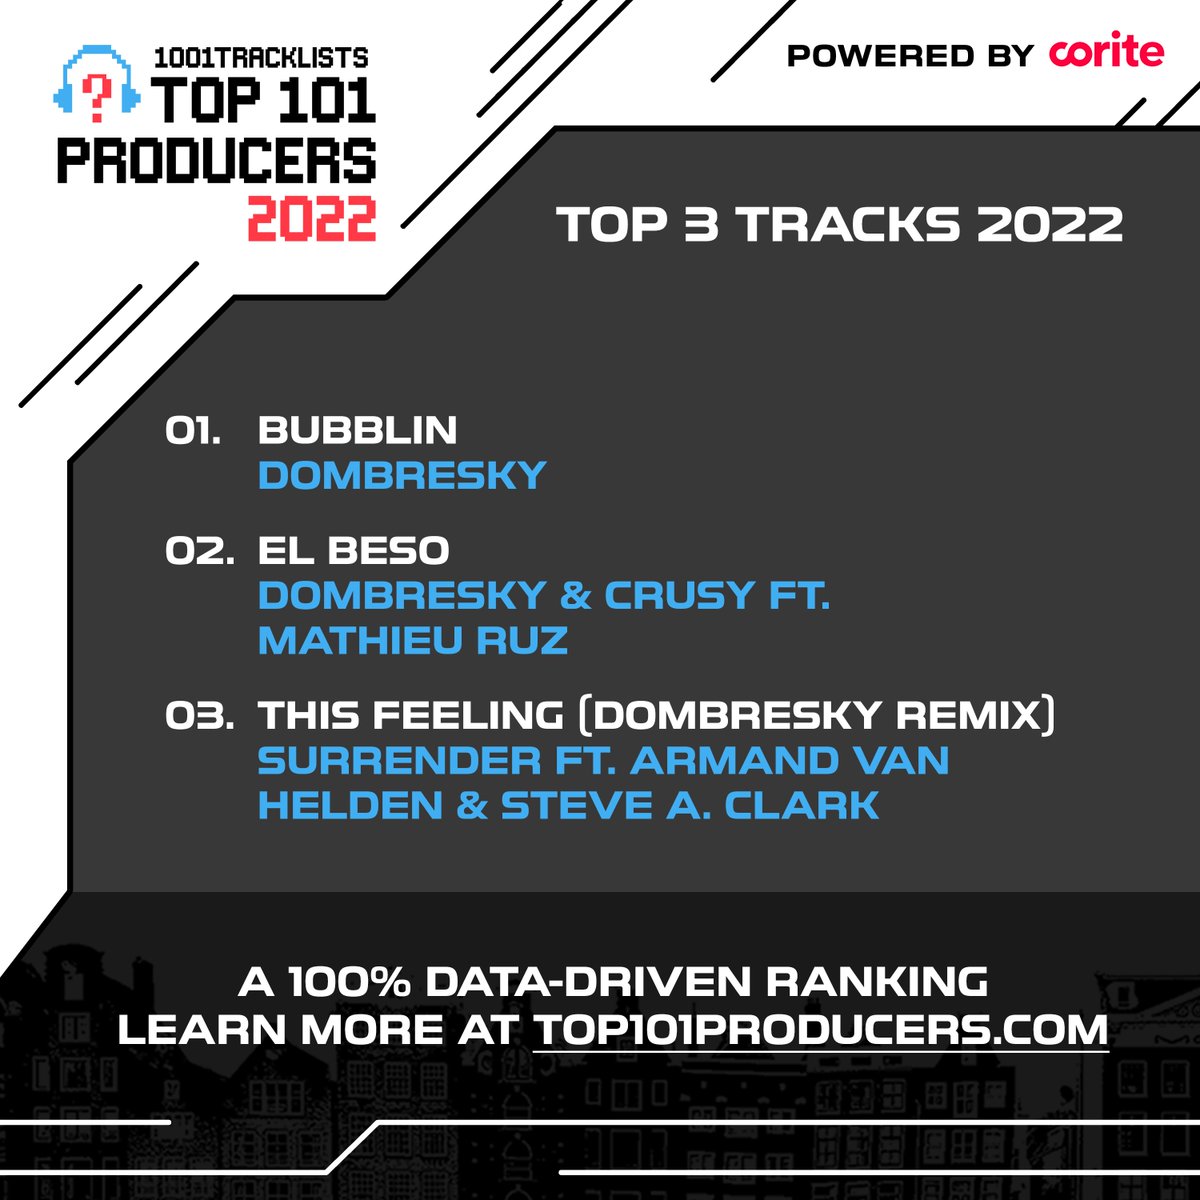 With hit tracks on Process Records and @toolroomrecords, @Dombresky is into the rankings for the first time with a 34th place finish in the #Top101Producers2022.